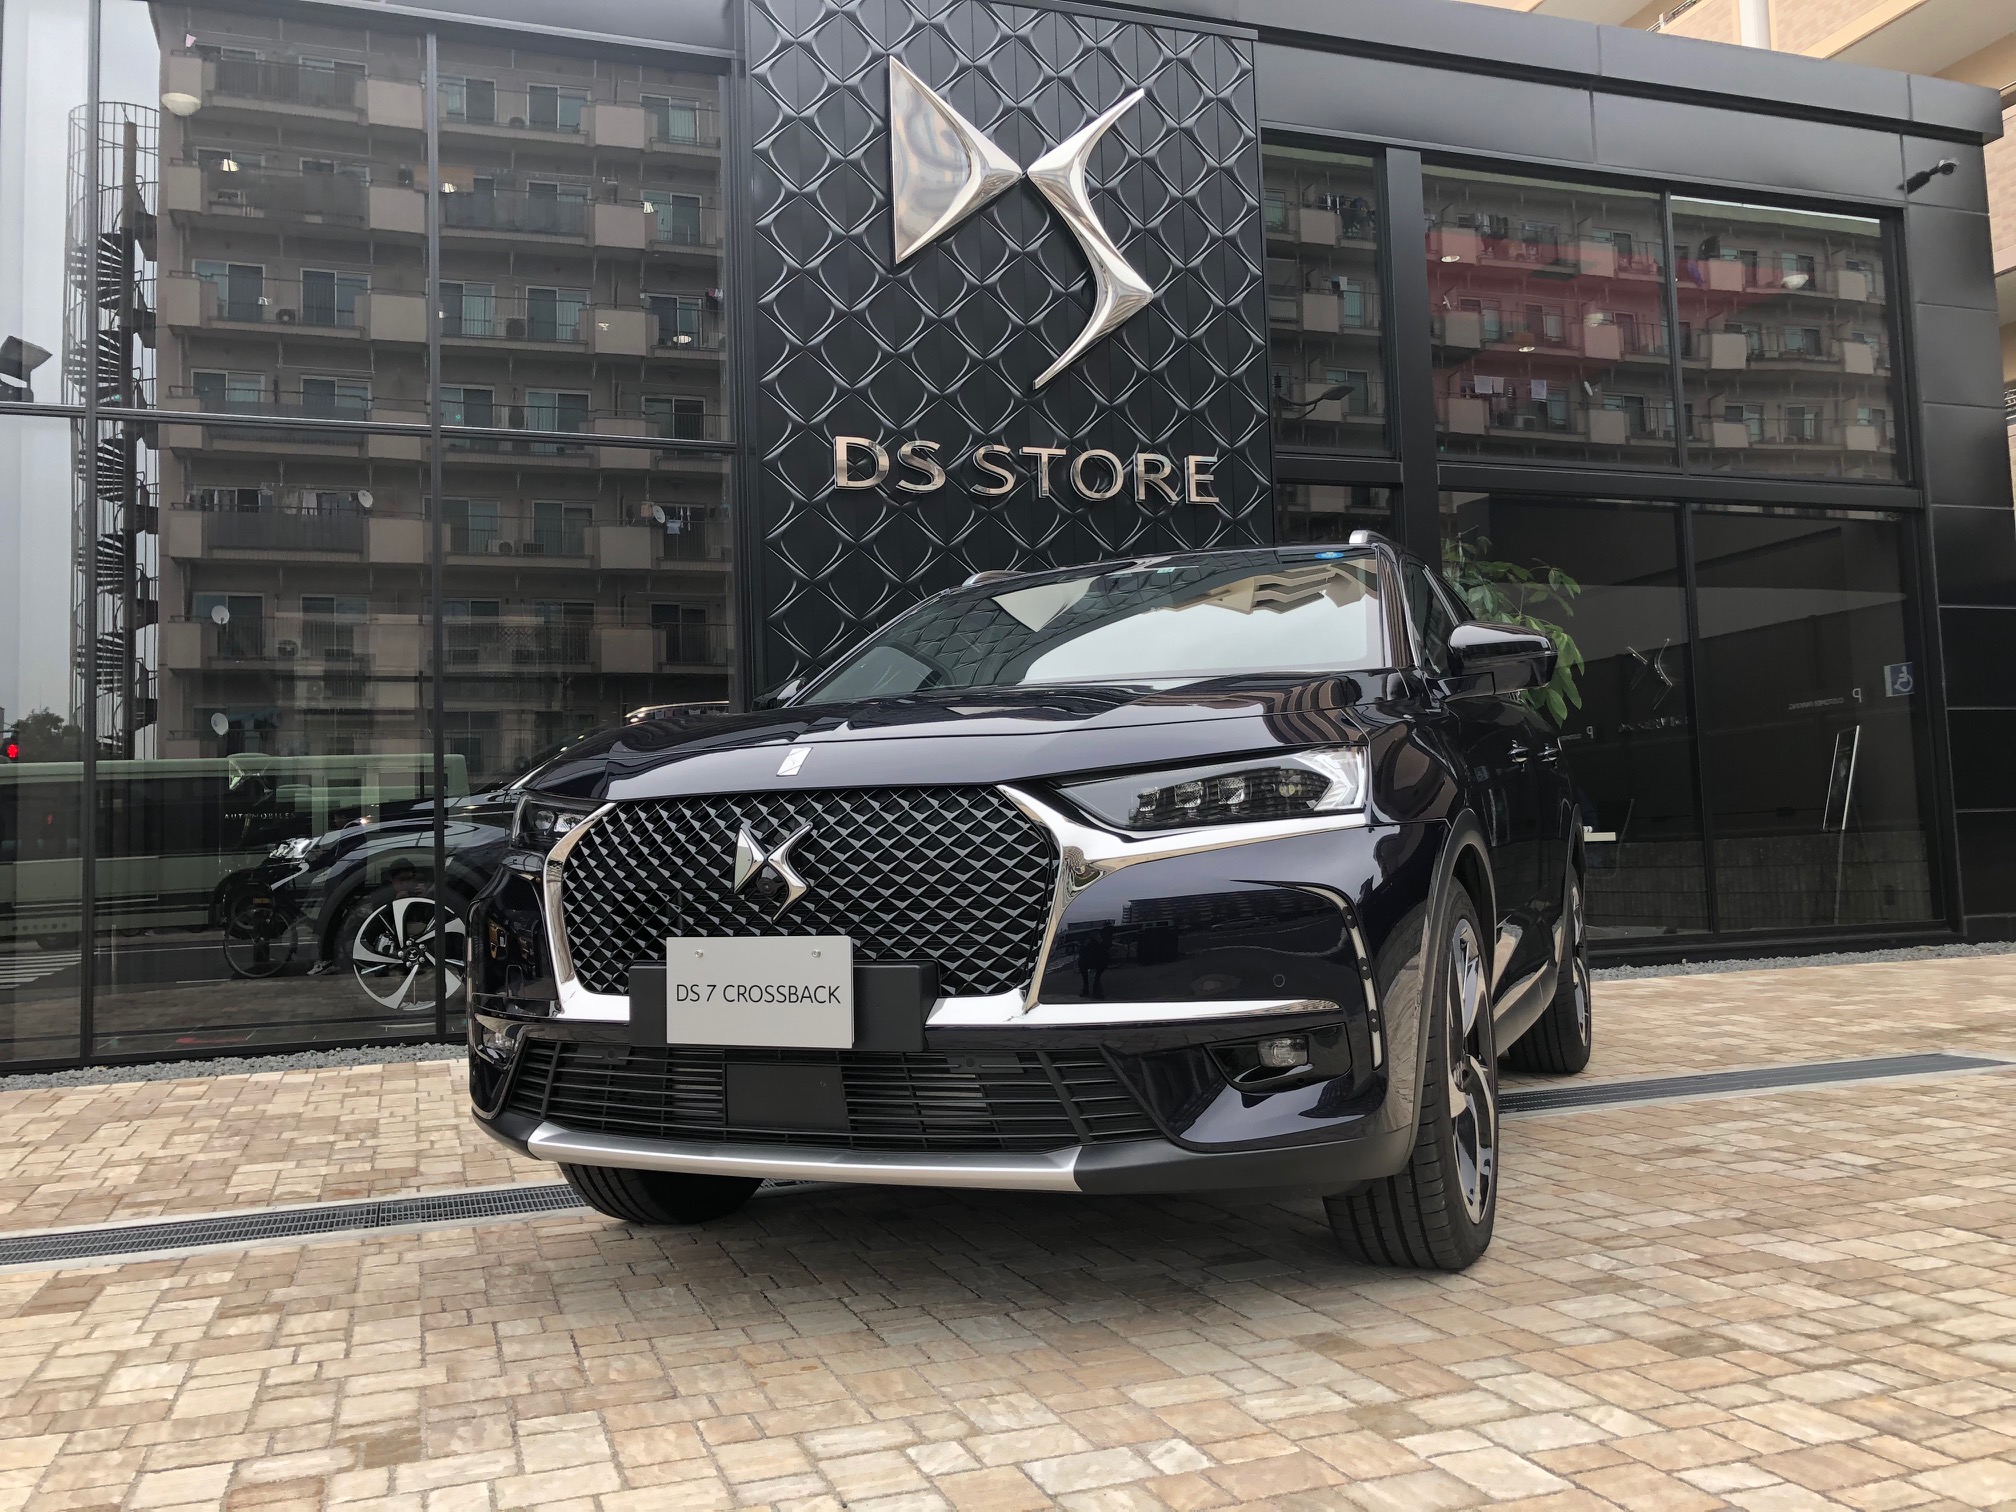 DS STORE京都だけのキャンペーン